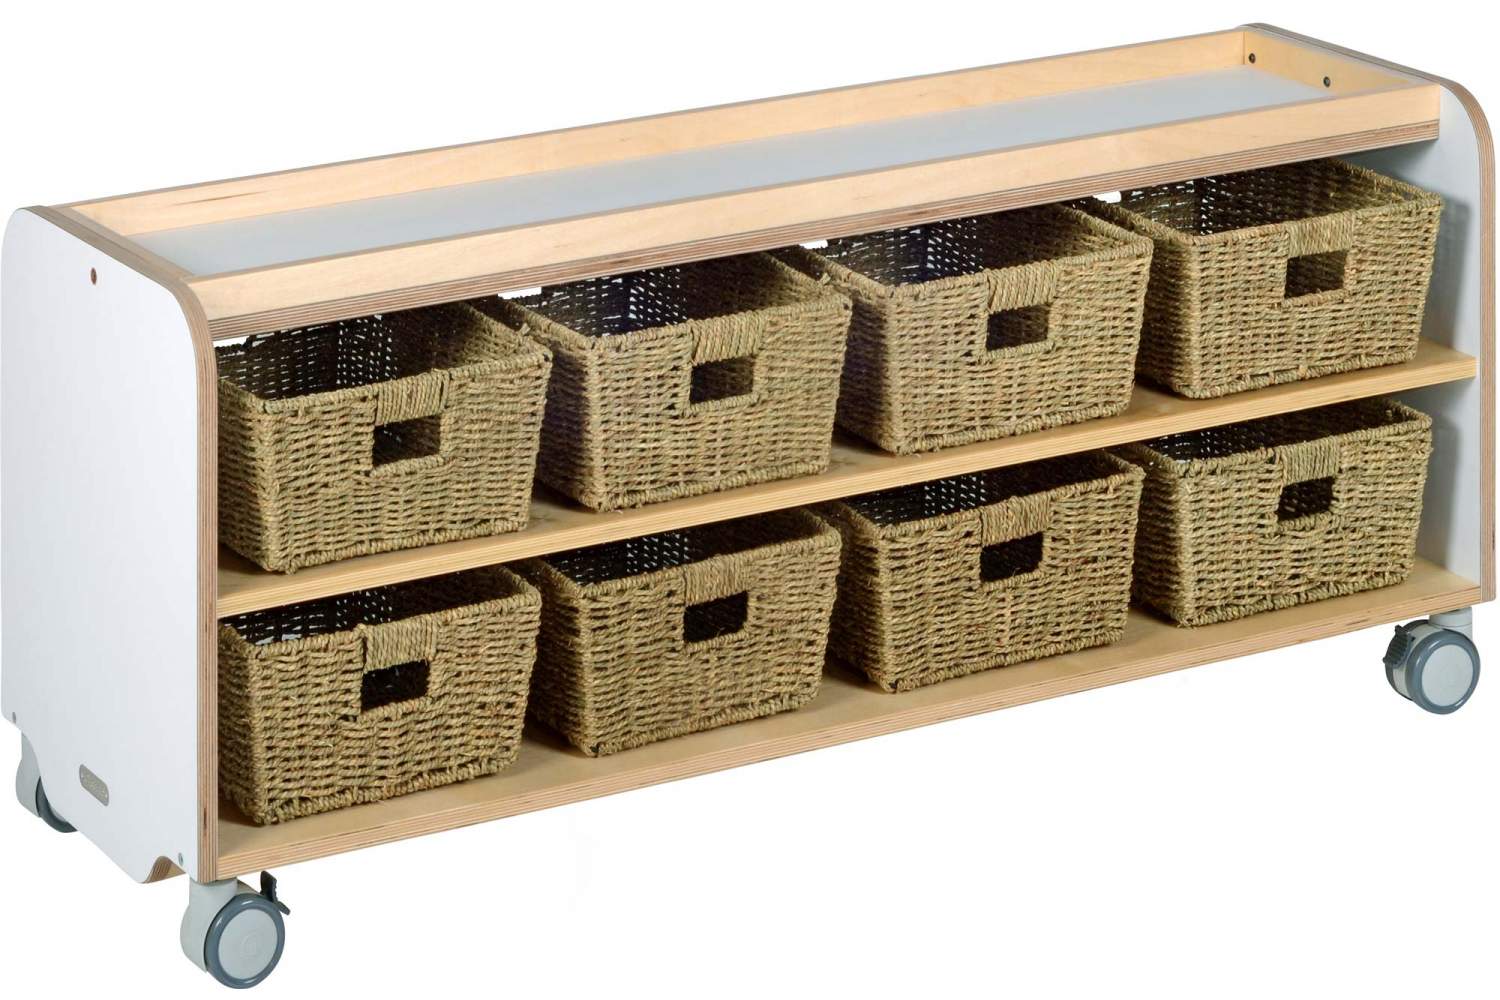 Clearance storage shelf - baskets not included